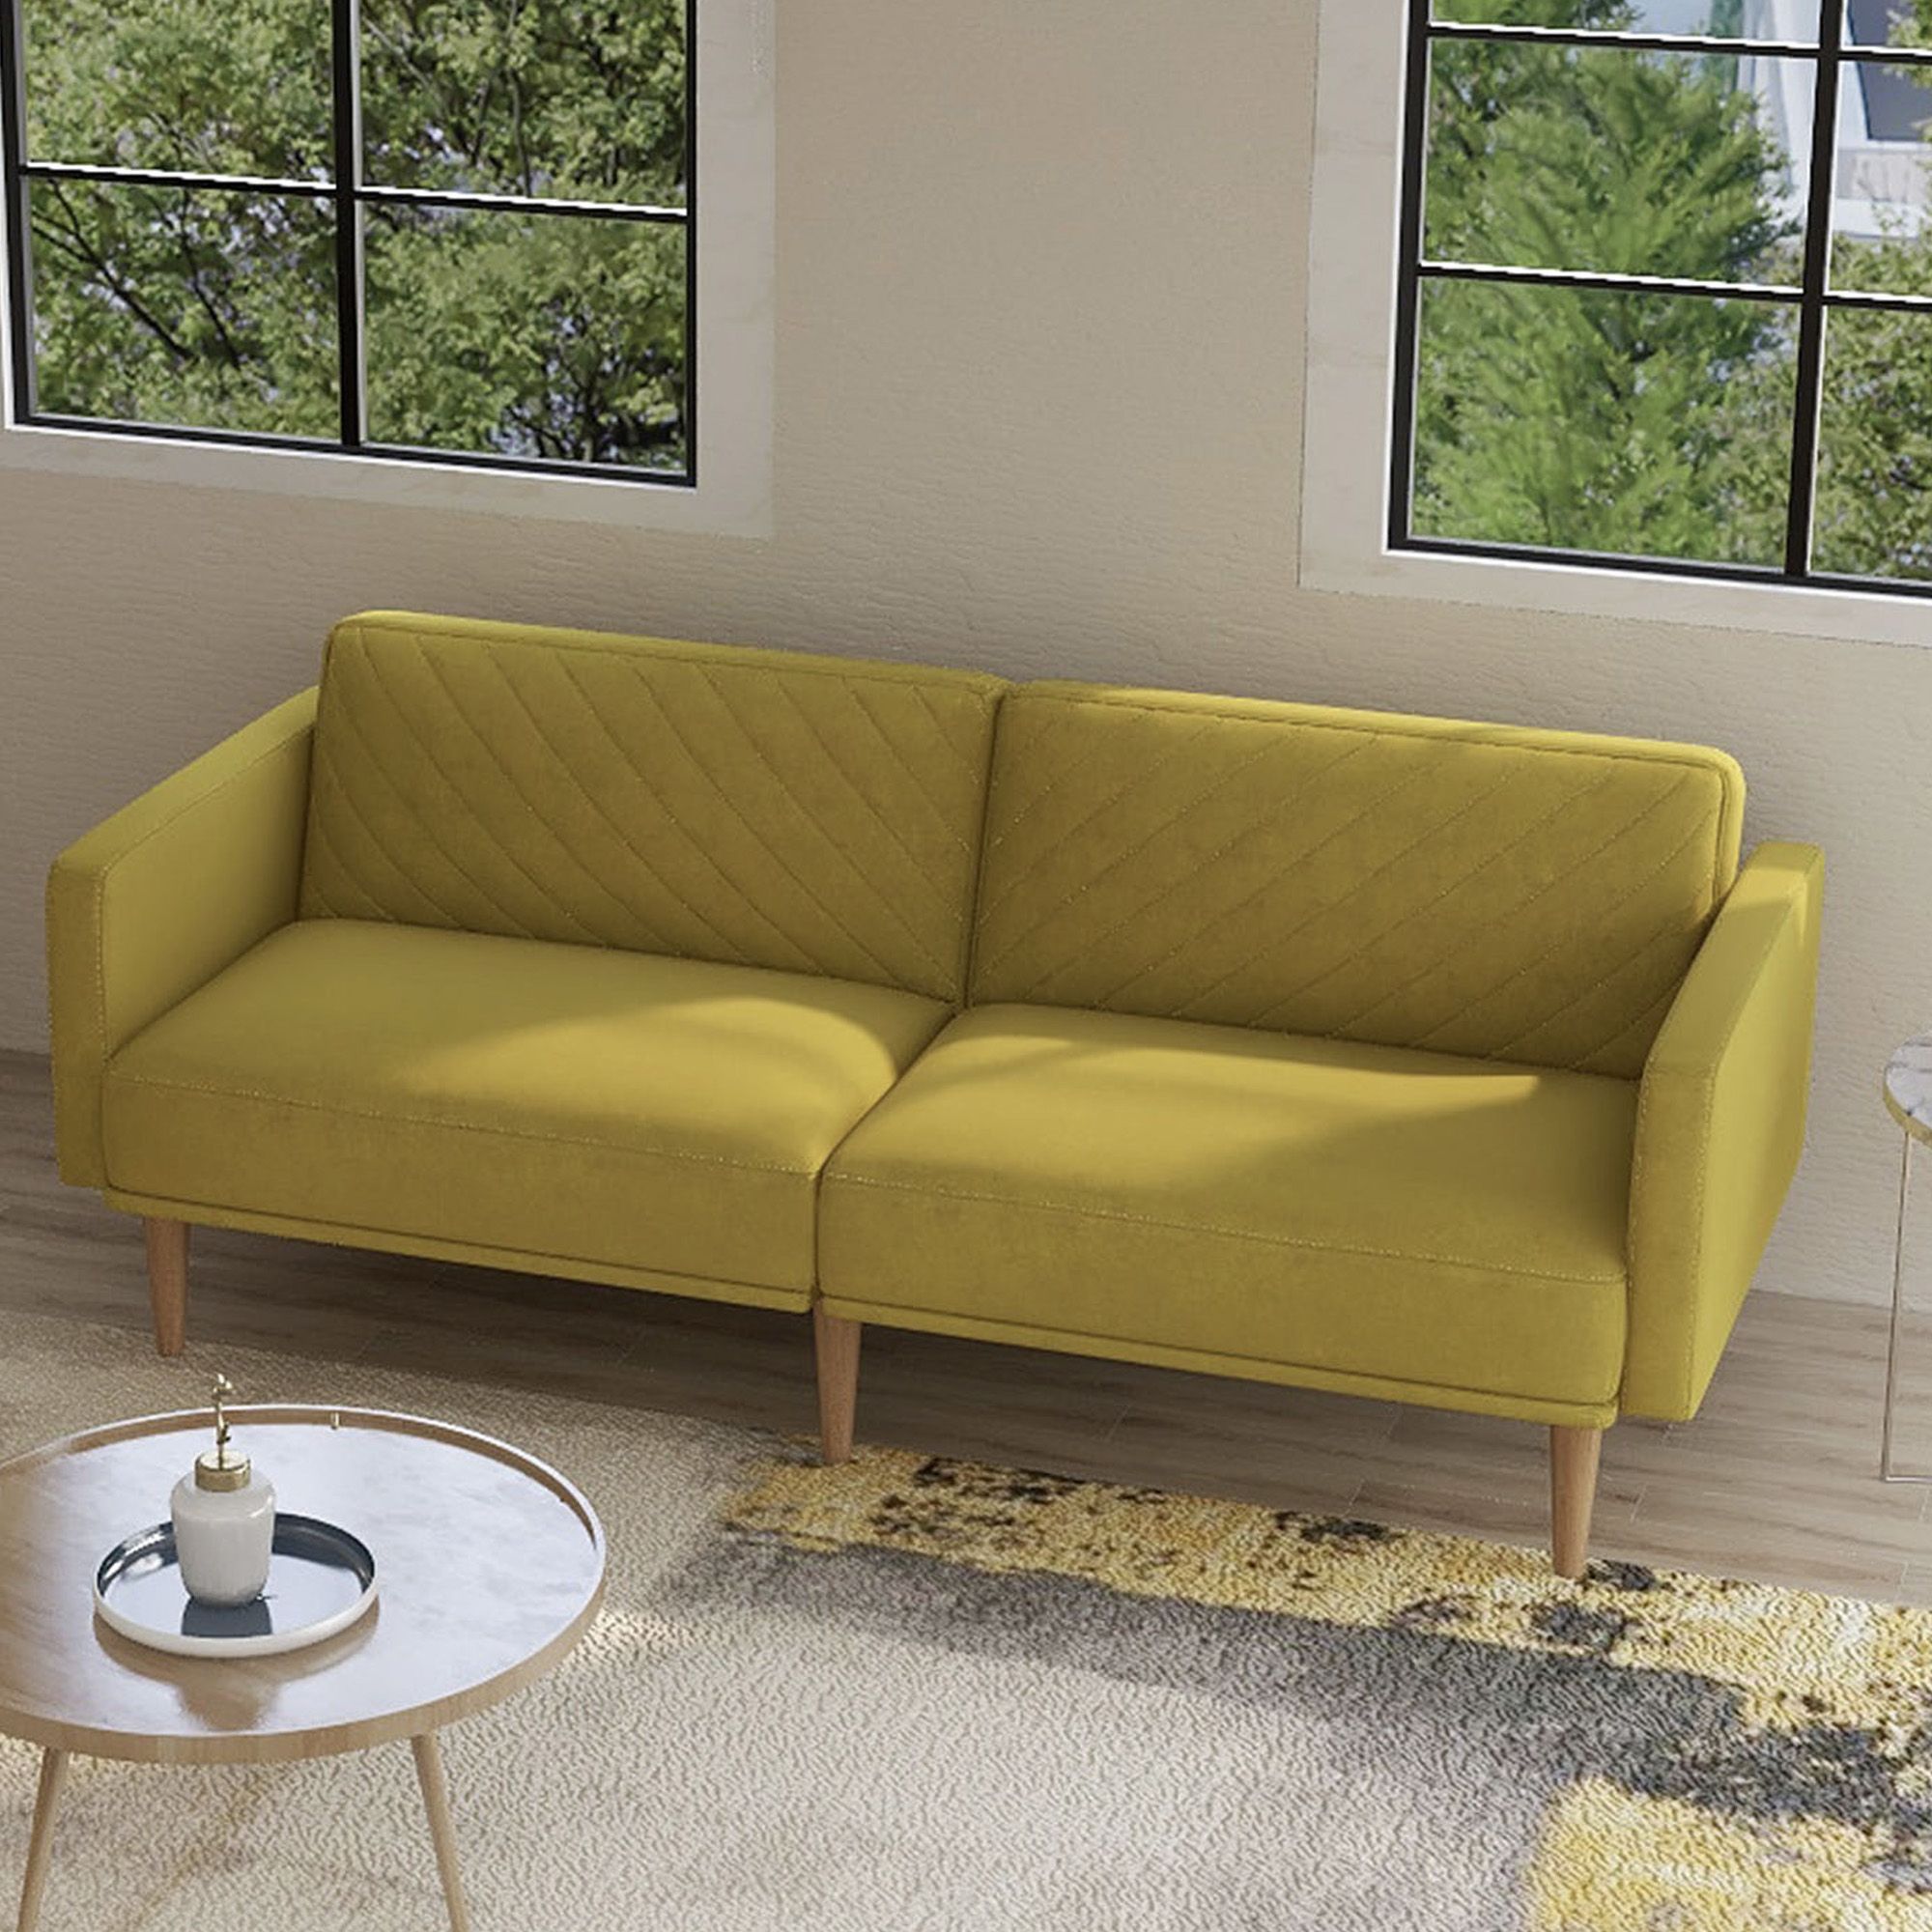 Velvet Fabric Sofa Beds, Urhomepro Mid Century Modern Pertaining To Mireille Modern And Contemporary Fabric Upholstered Sectional Sofas (Photo 5 of 15)